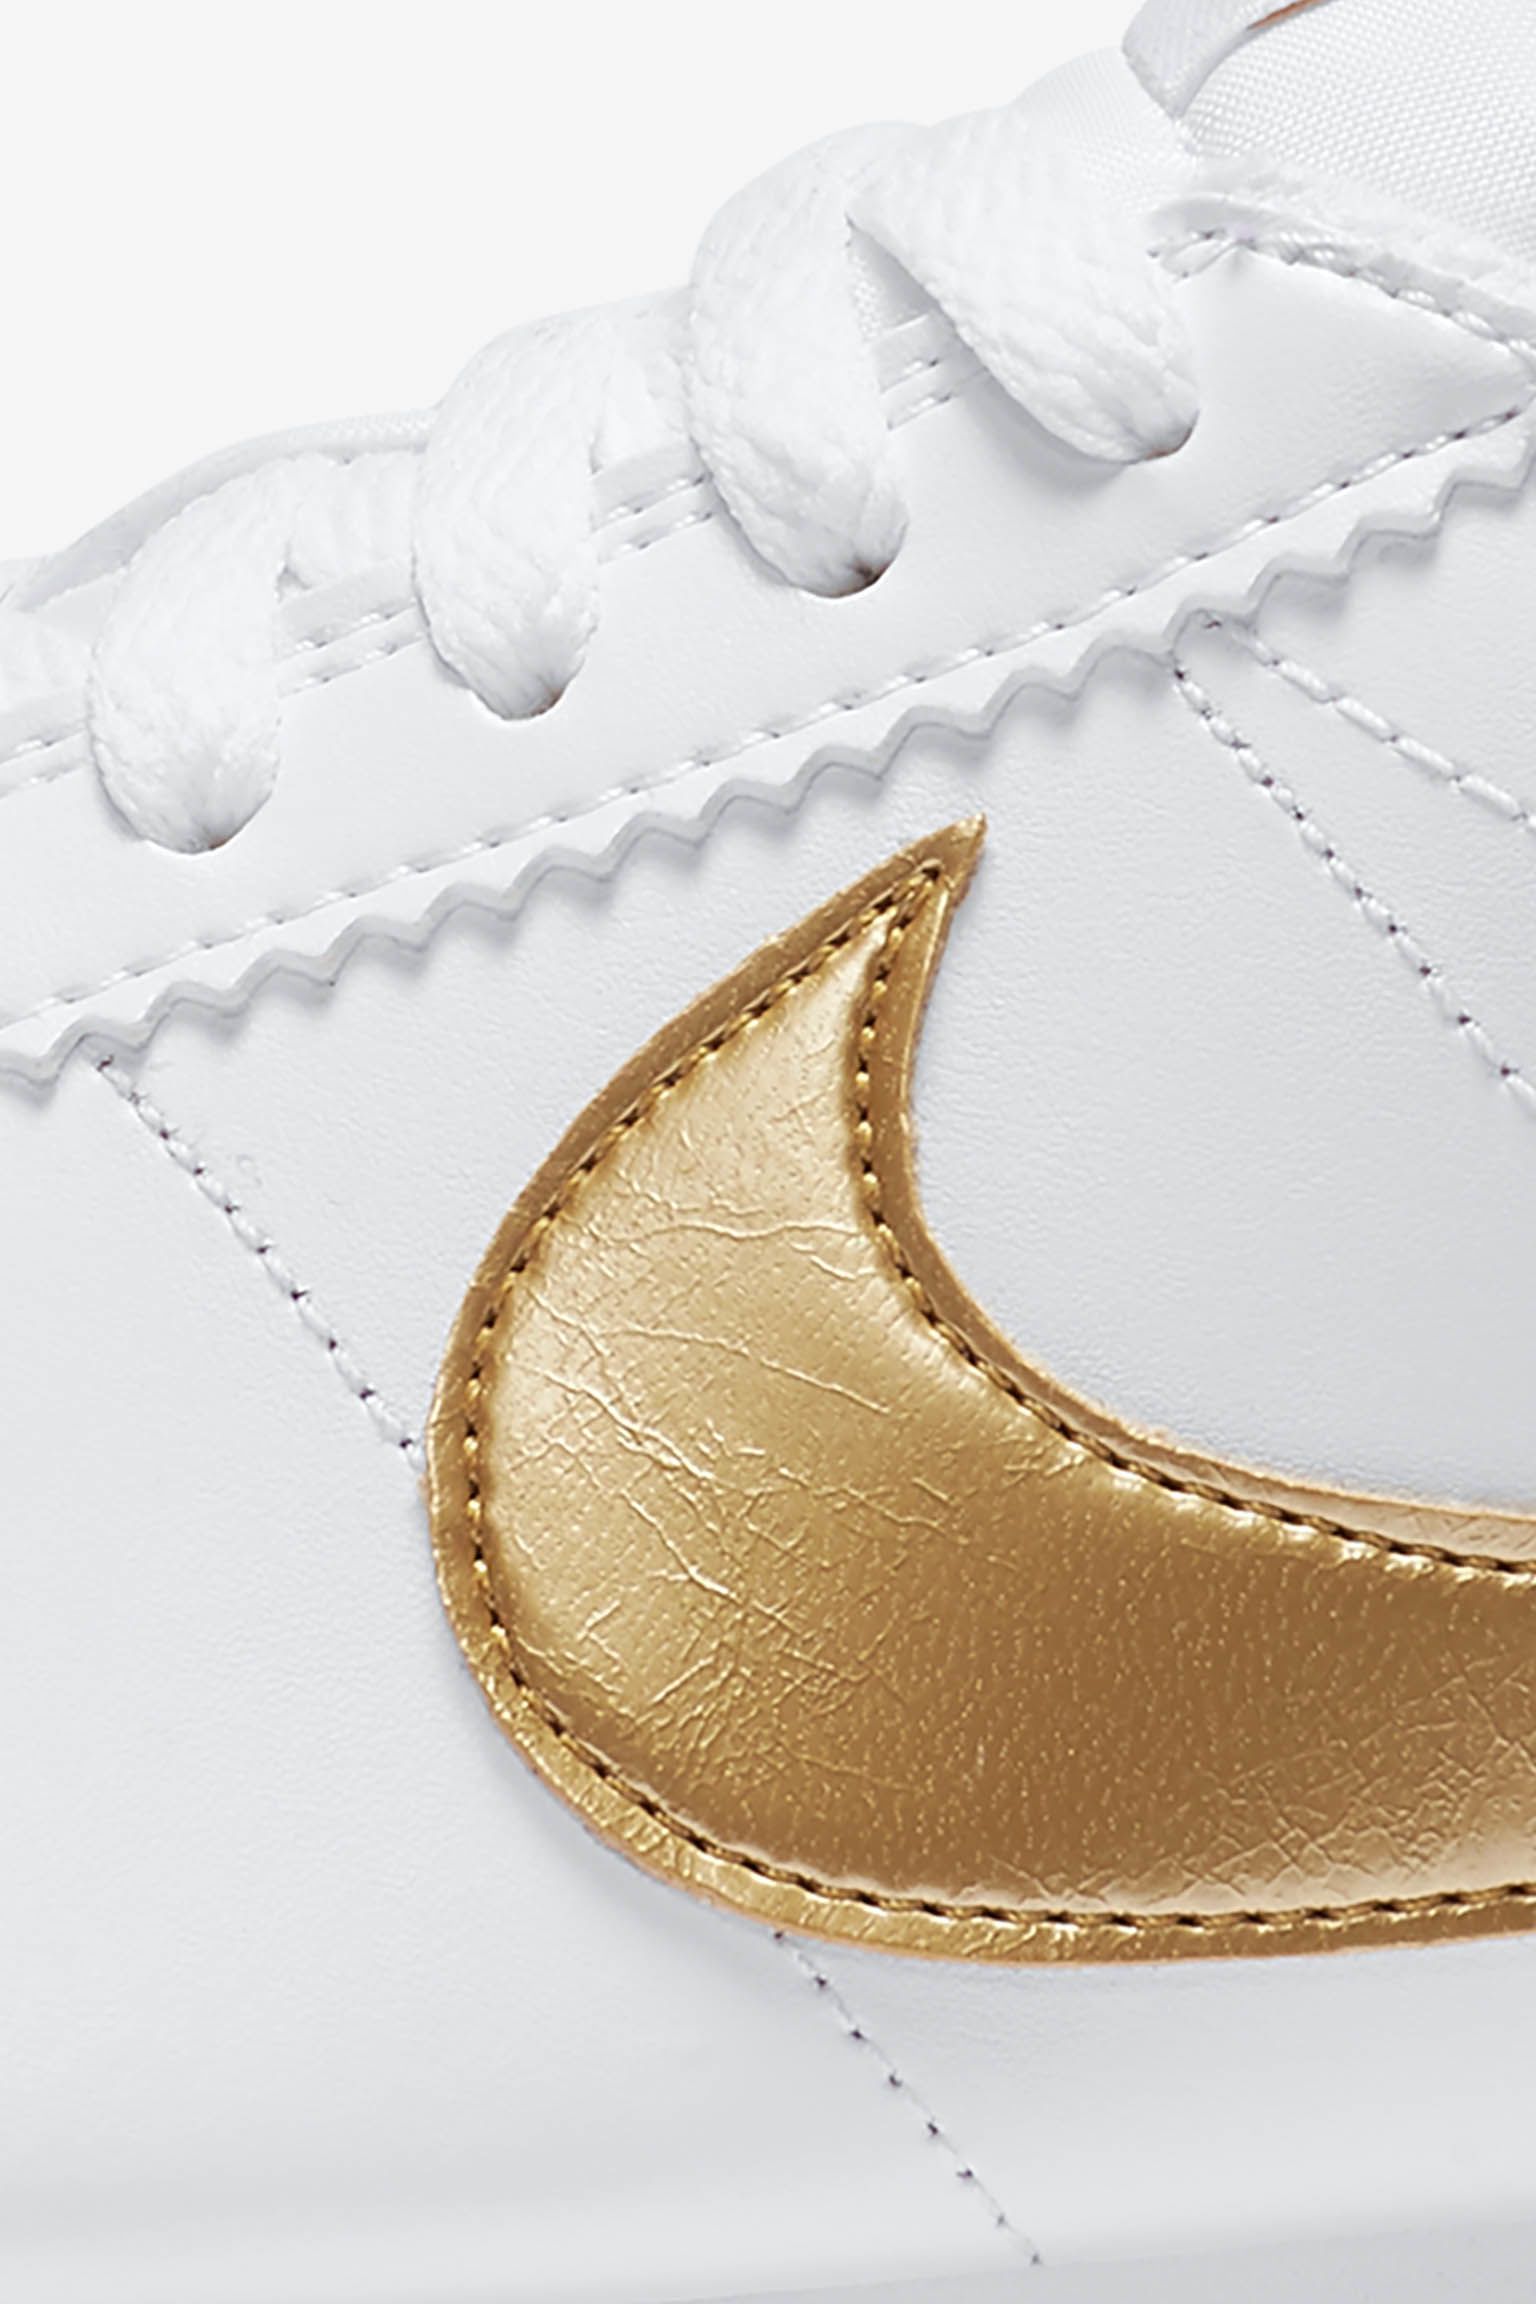 nike cortez womens white and gold